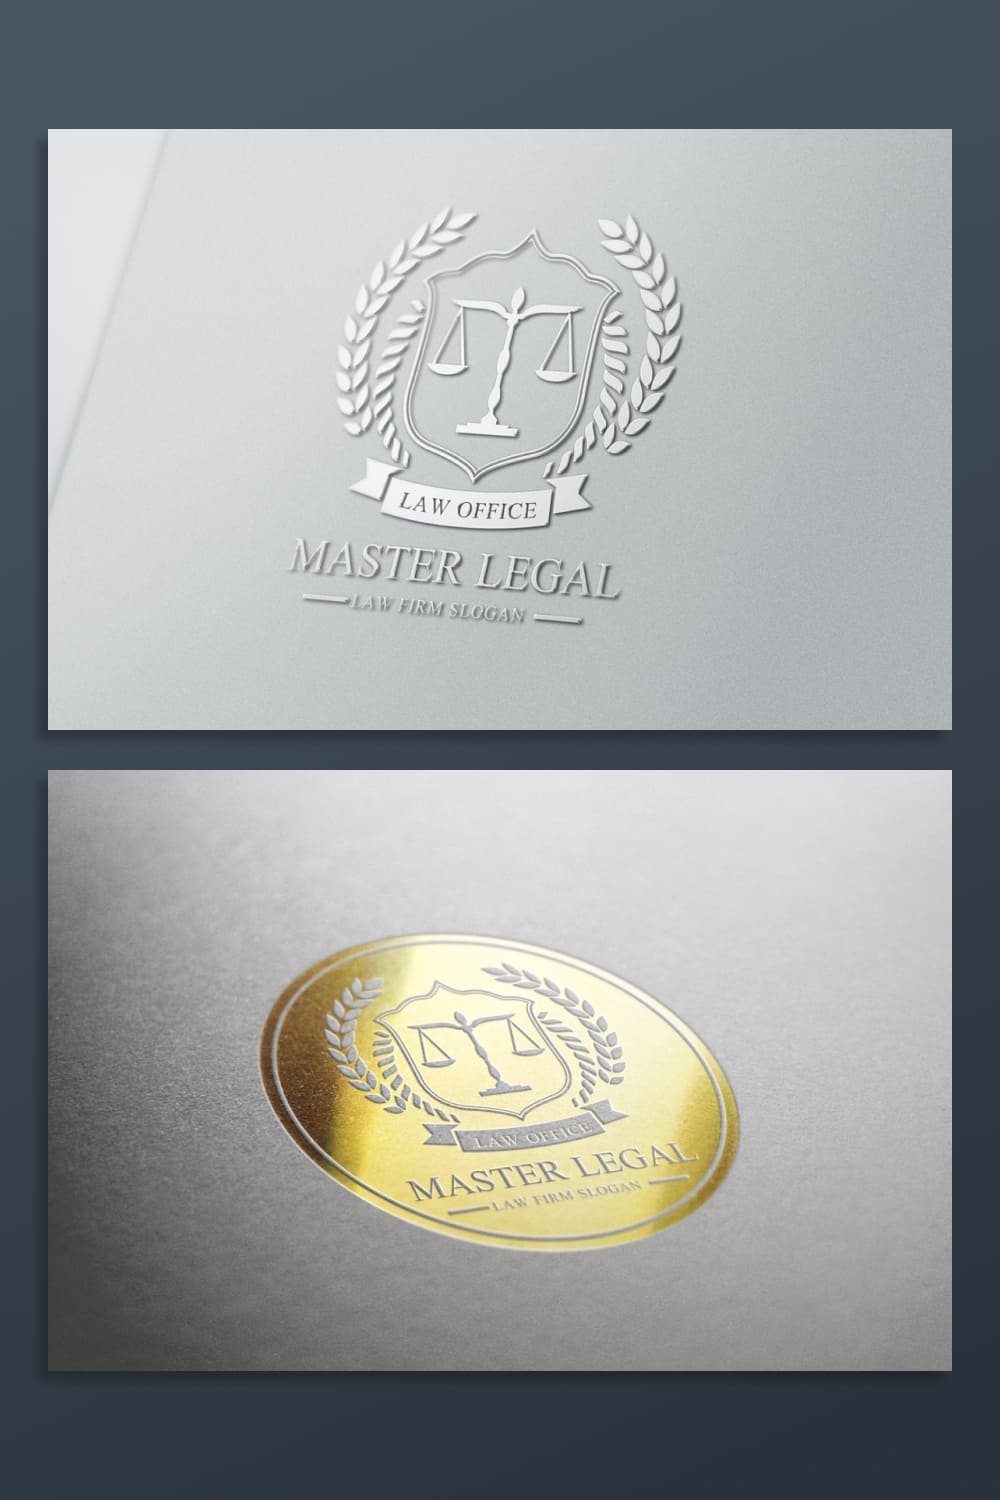 law firm logotype design template.